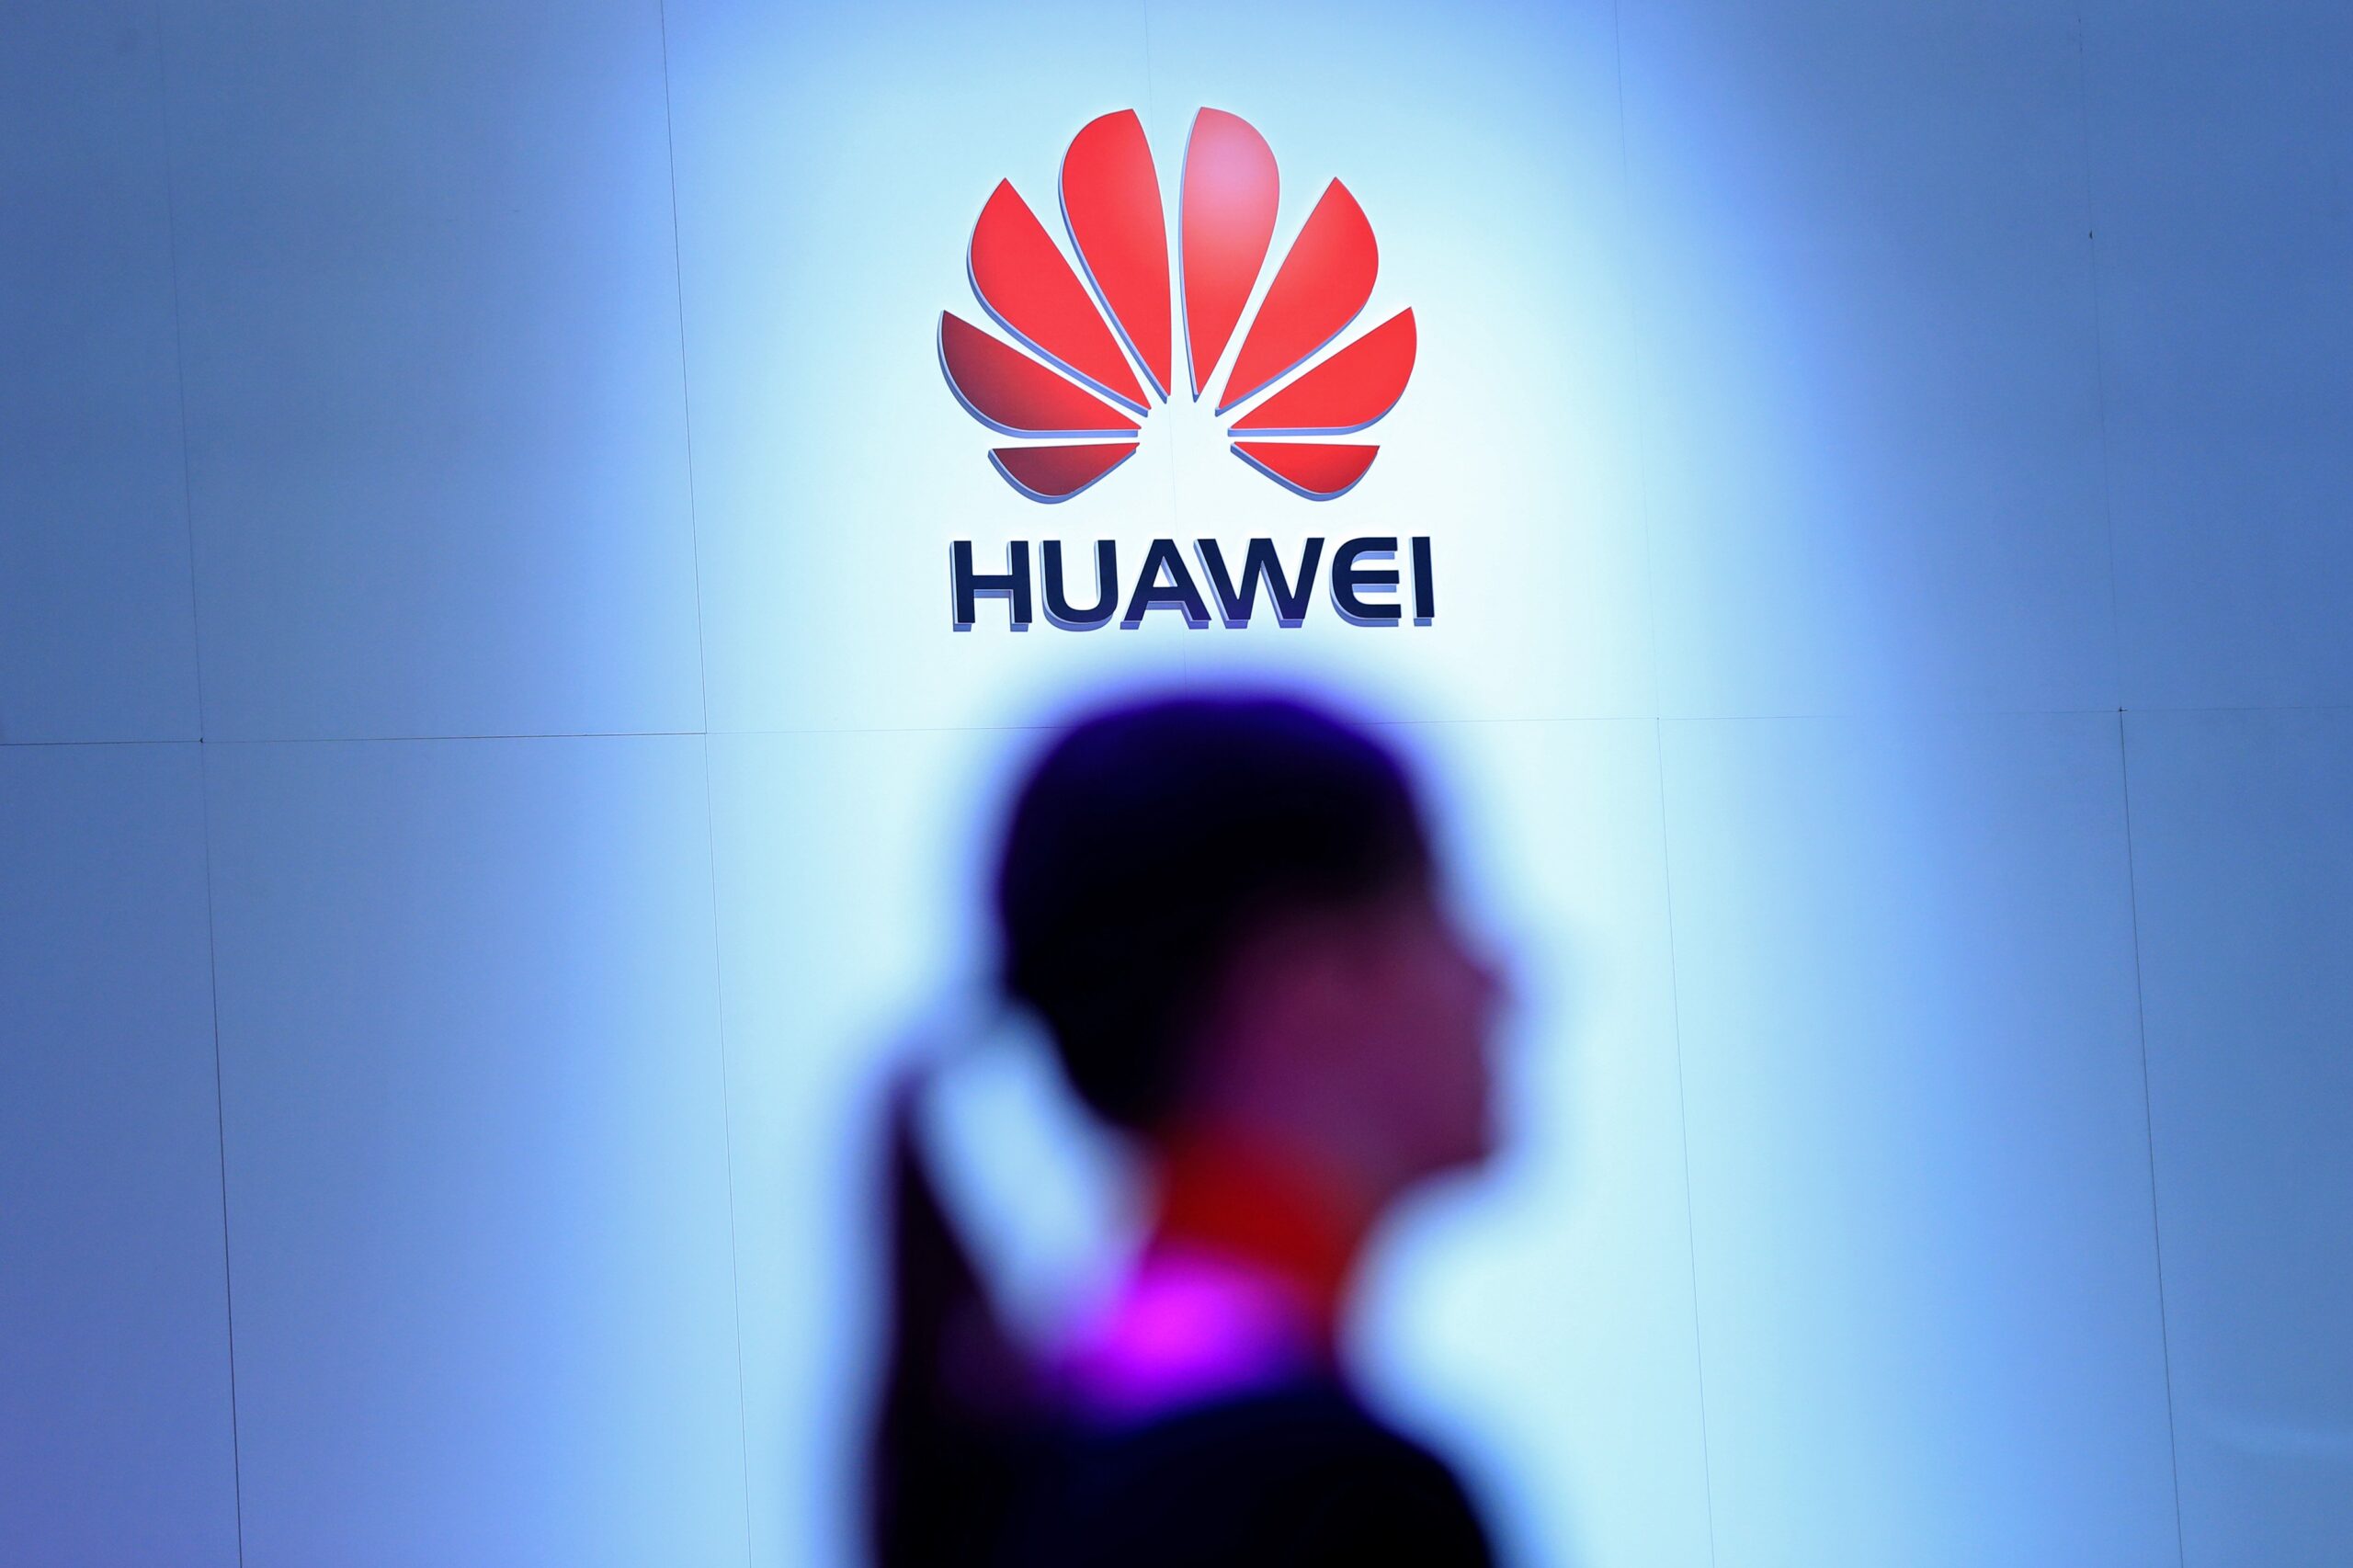 UK telecom operators to stockpile Huawei equipment due to recent US Sanctions